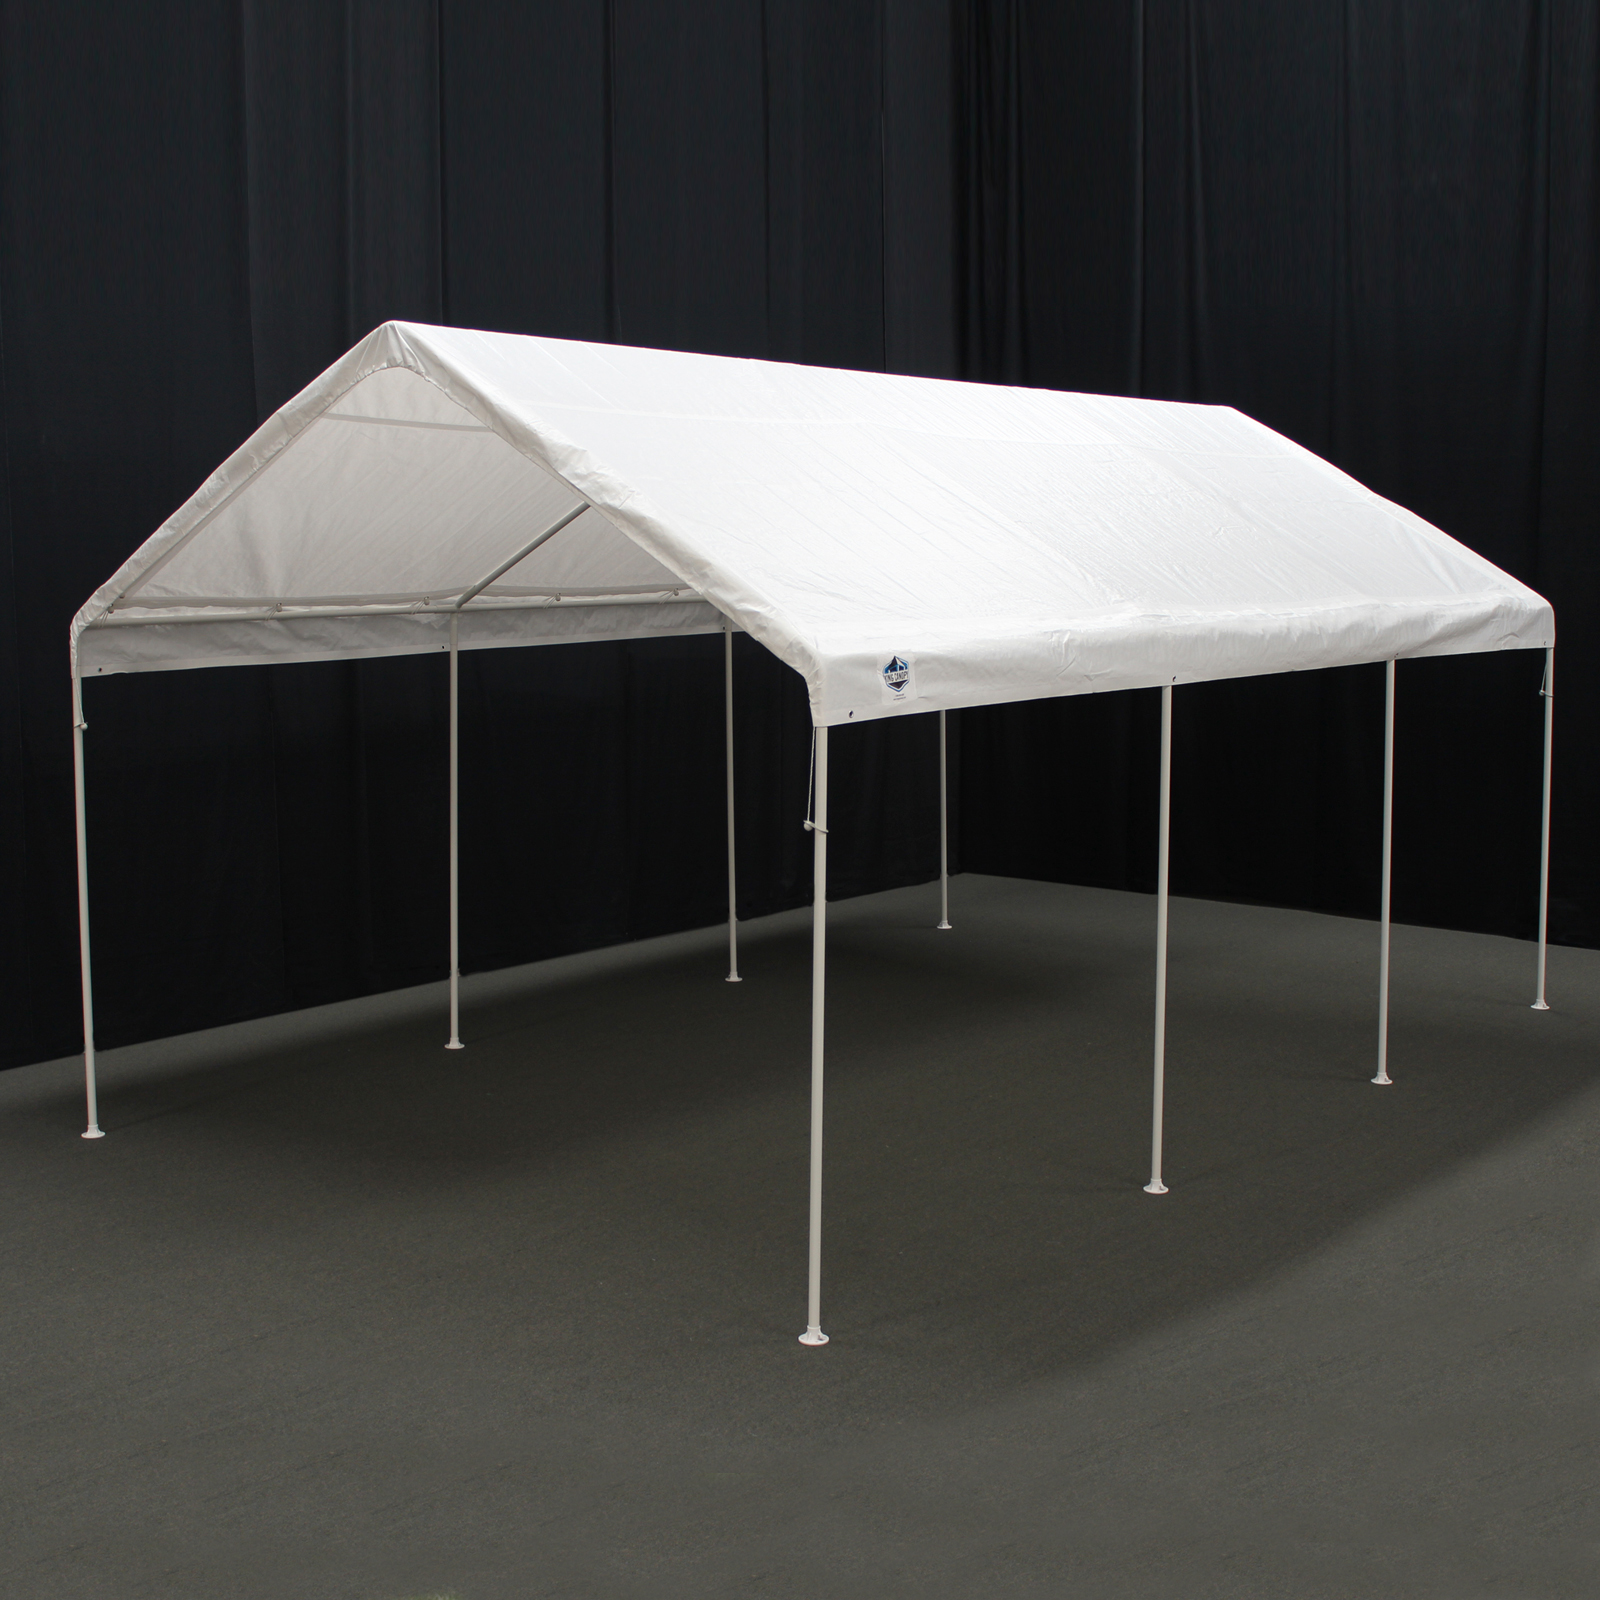 King Canopy Universal 12x20 Canopy - White